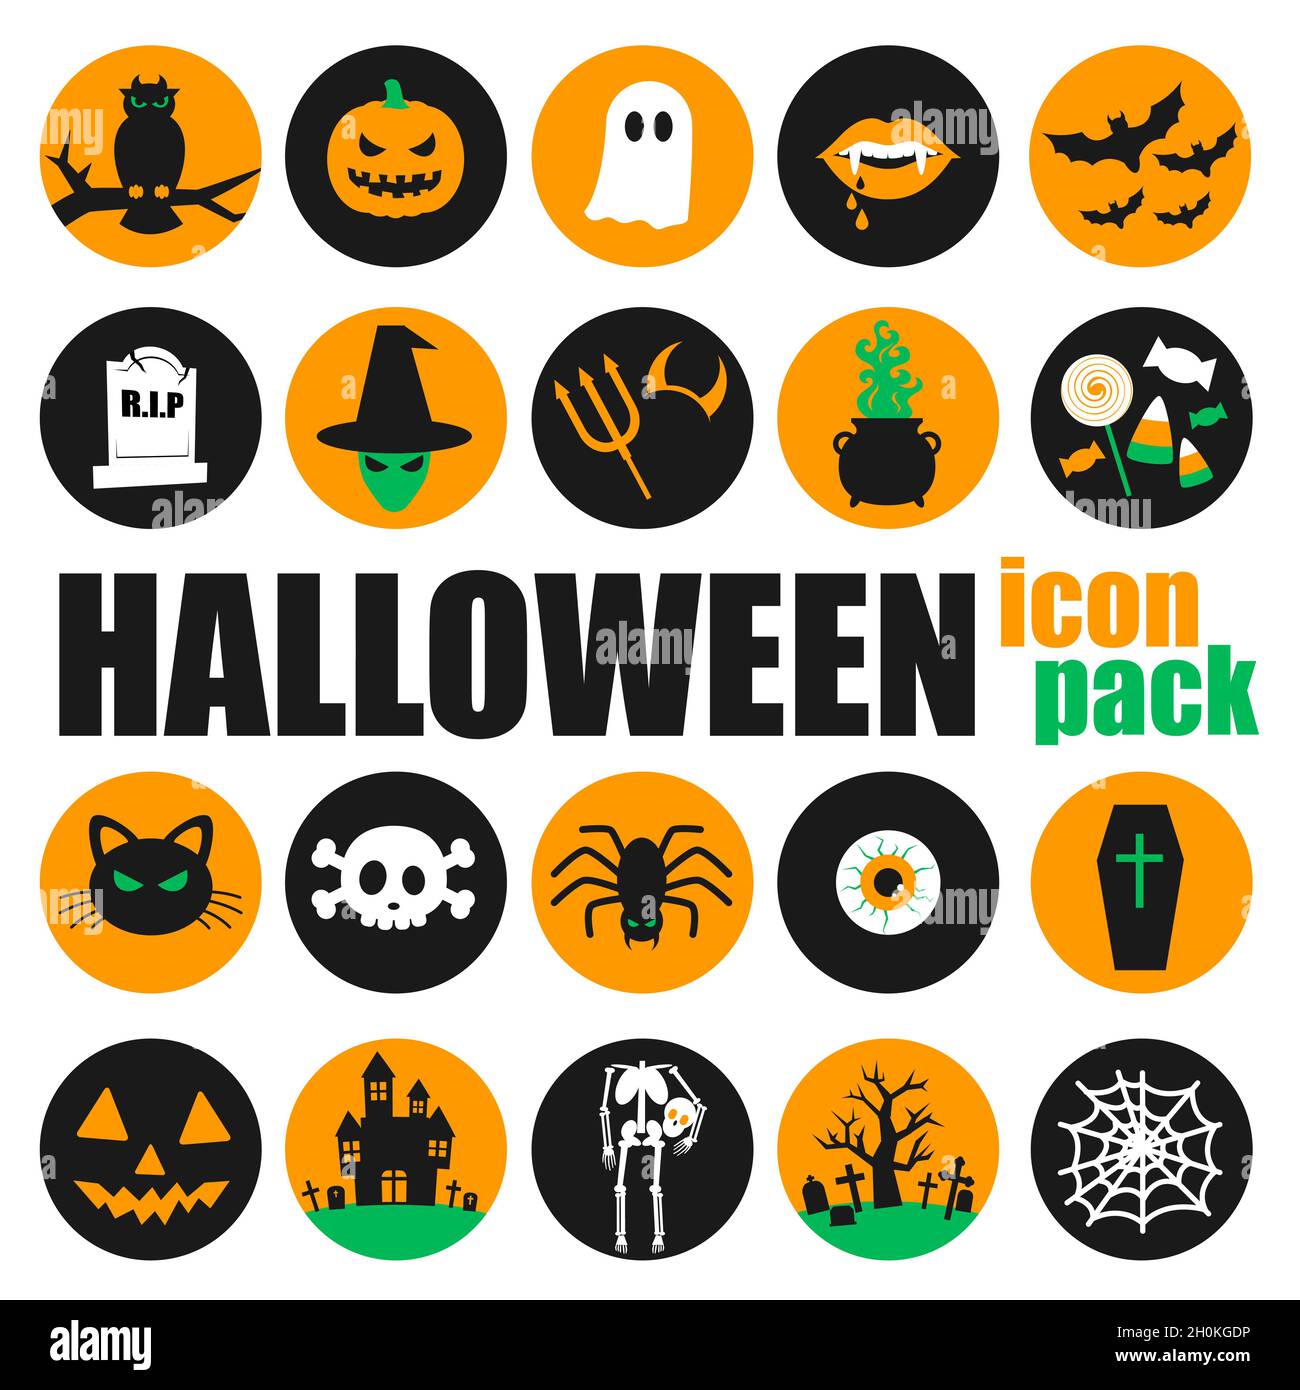 Halloween Themed Vector Icons Pack Stock Vector